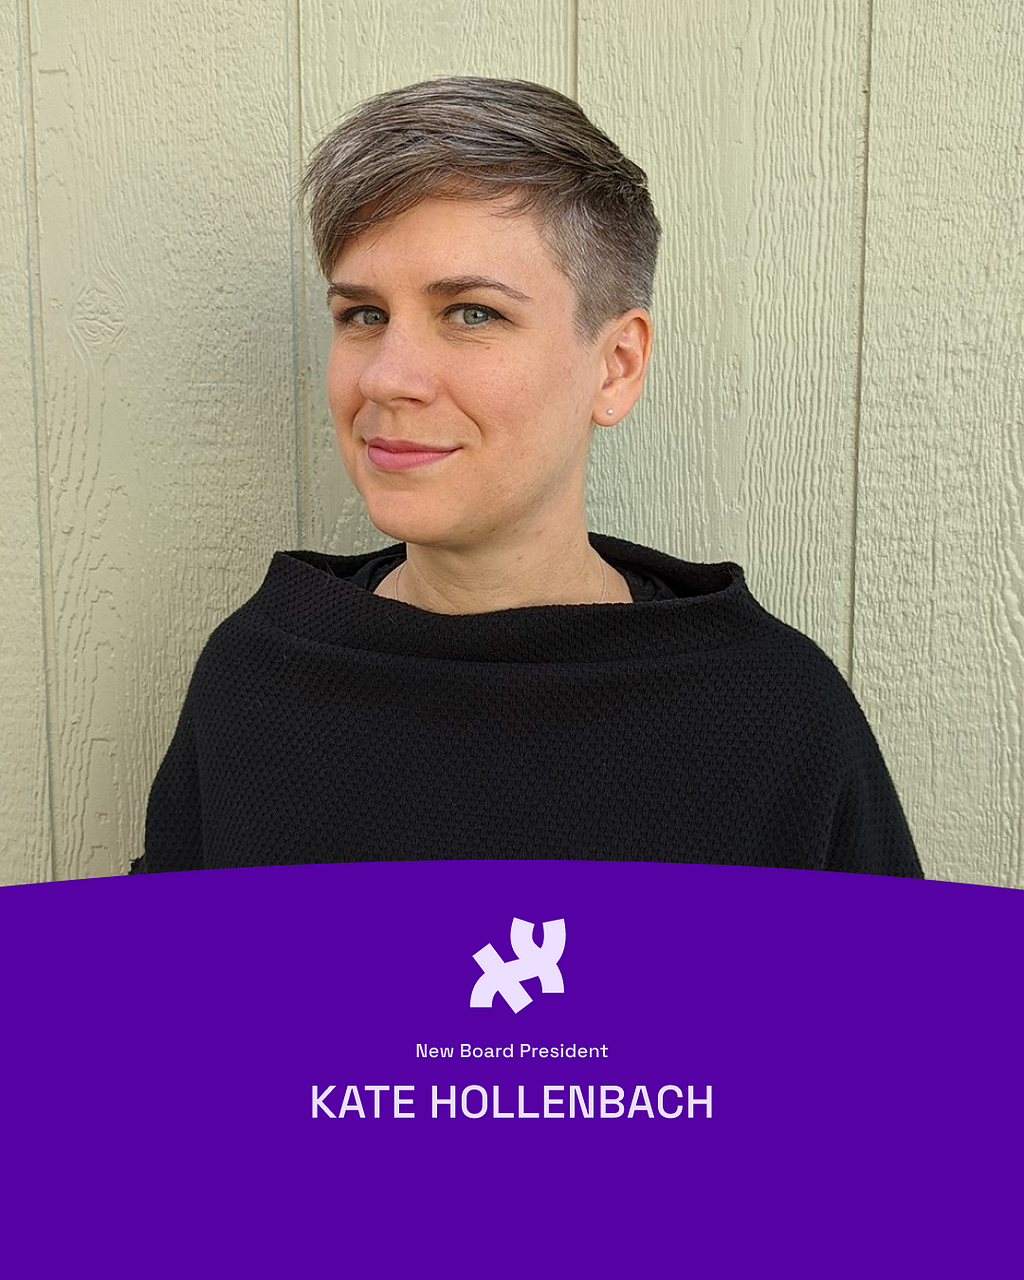 Kate is wearing a black sweater, standing in front of some light green paneling. She has pale skin and short, cropped gray hair. She looks at the camera with a shy smile. Their profile photo sits on top of a dark purple graphic element at the bottom in the shape of a hill, which reads, “New Board President Kate Hollenbach” with the Processing logo in white on top of the text.